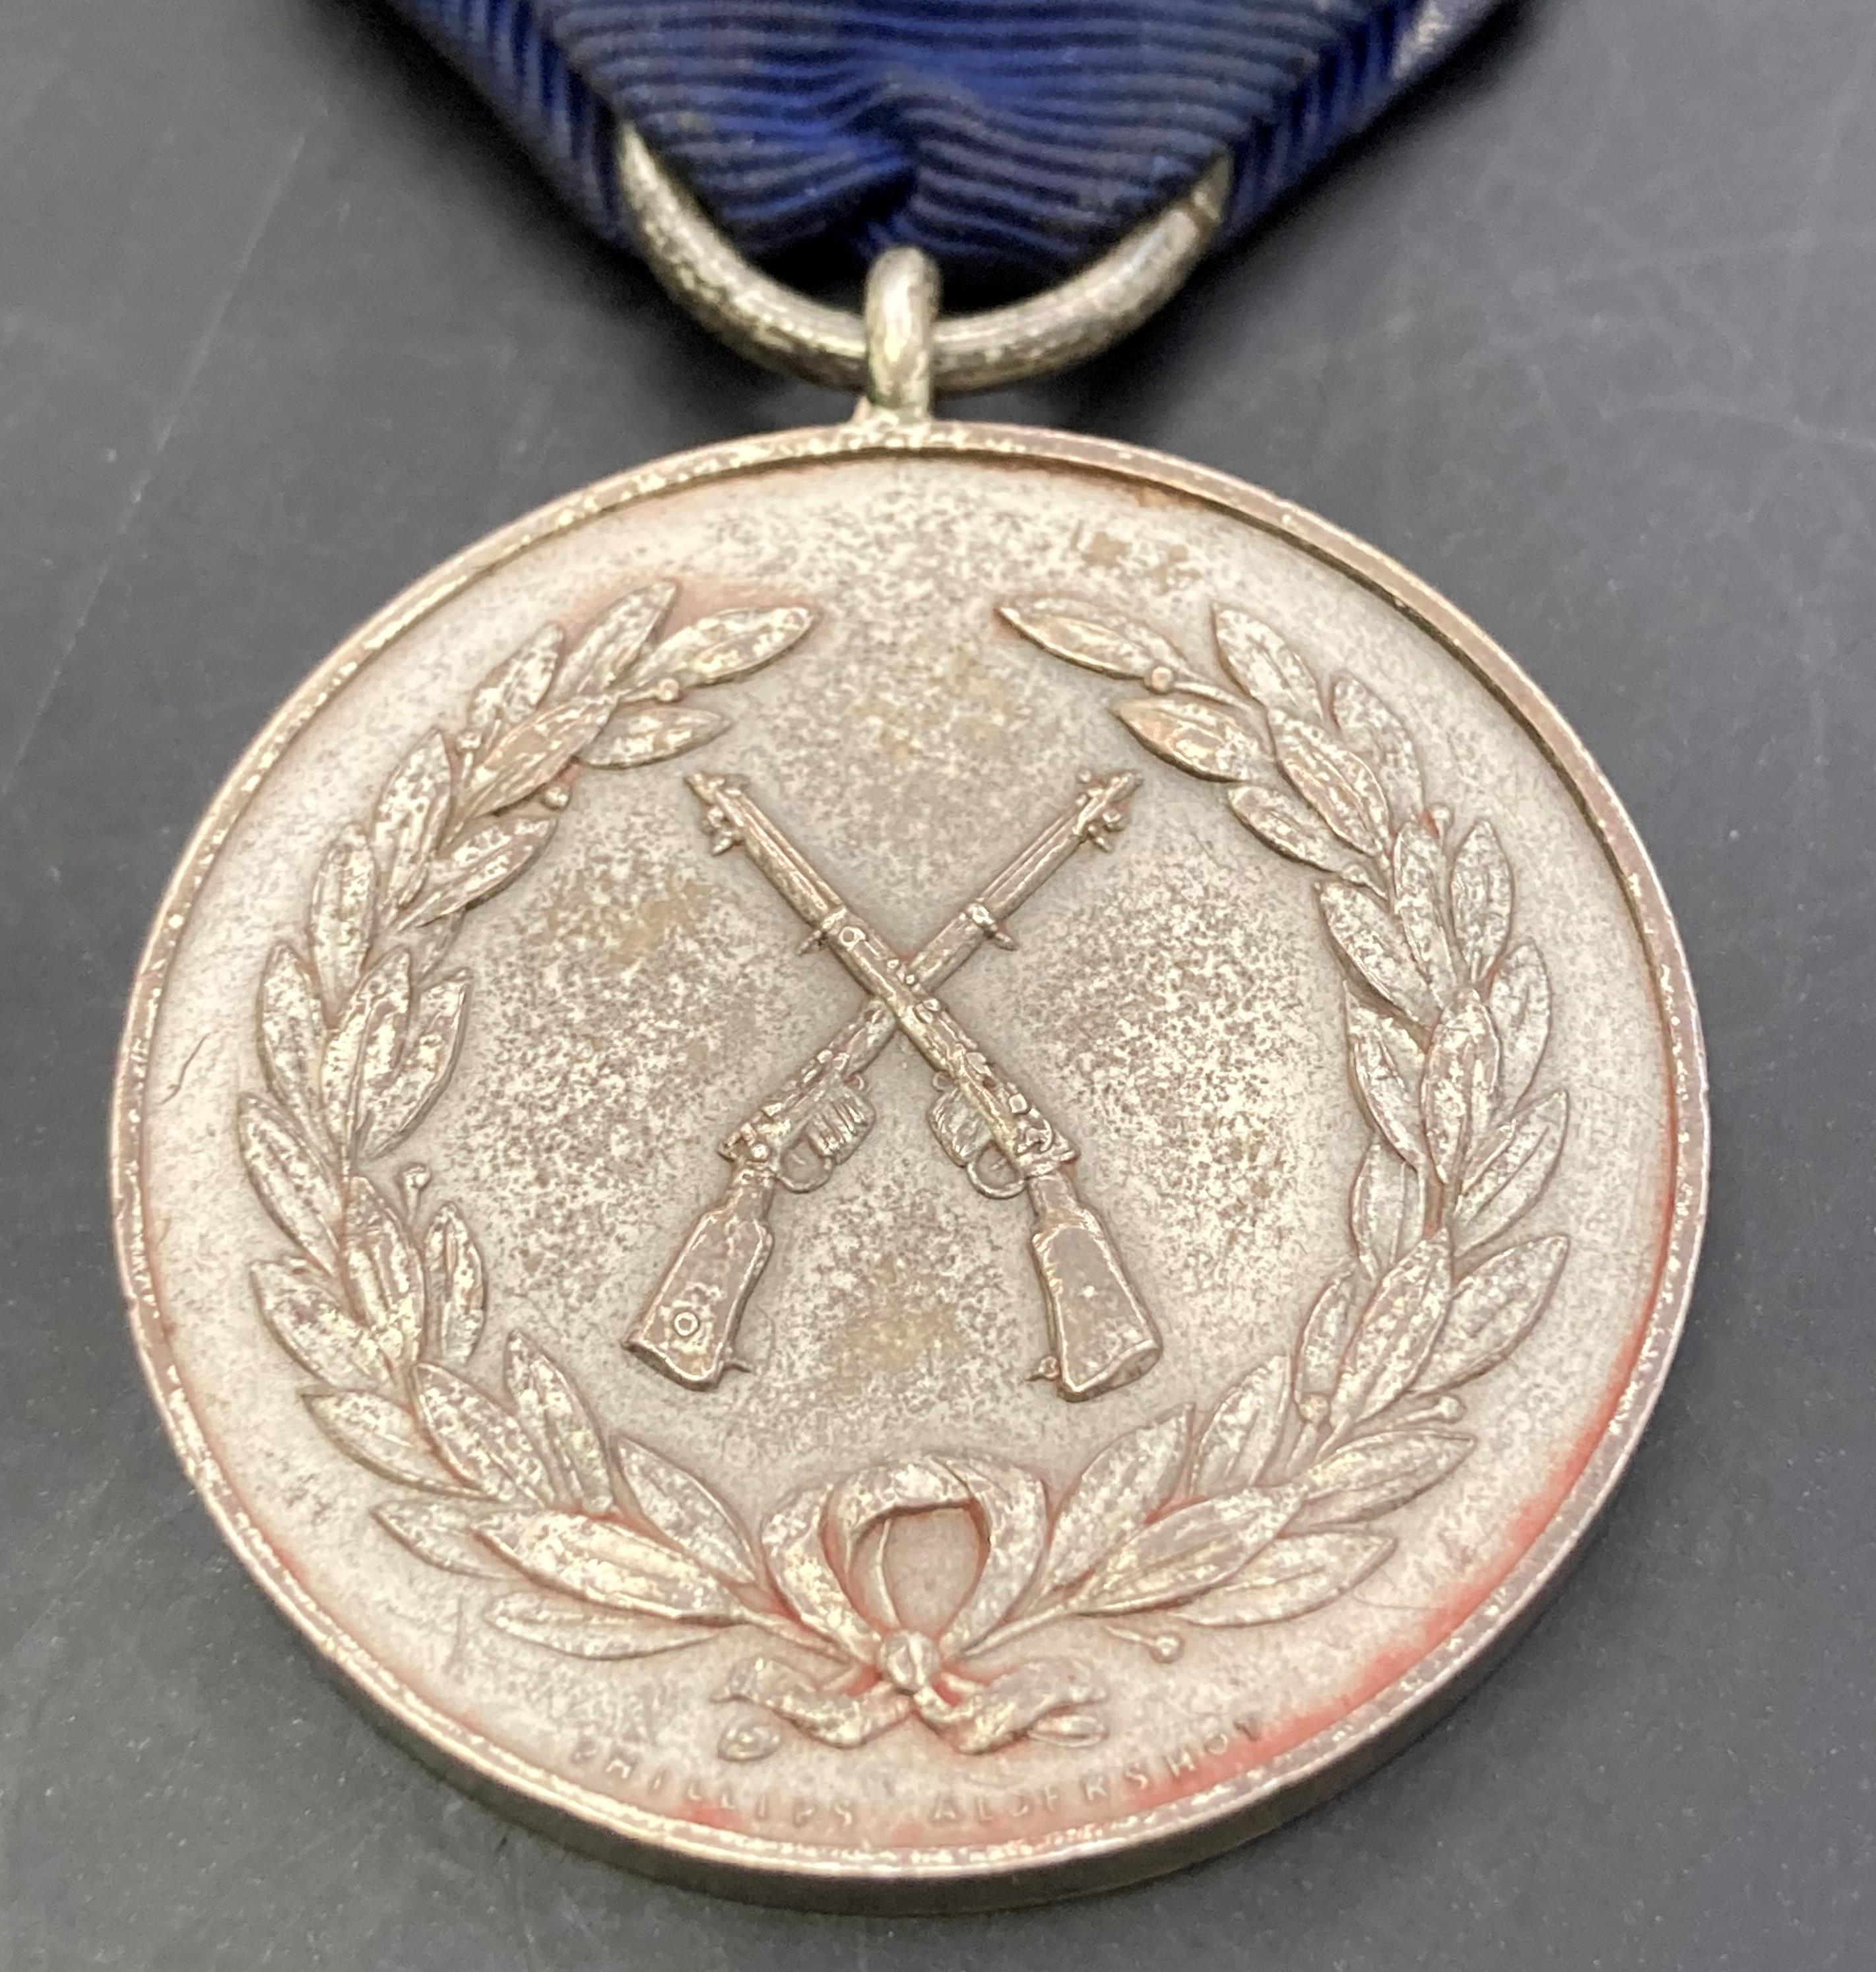 Rifle Meeting Medal and clasps. - Image 3 of 3